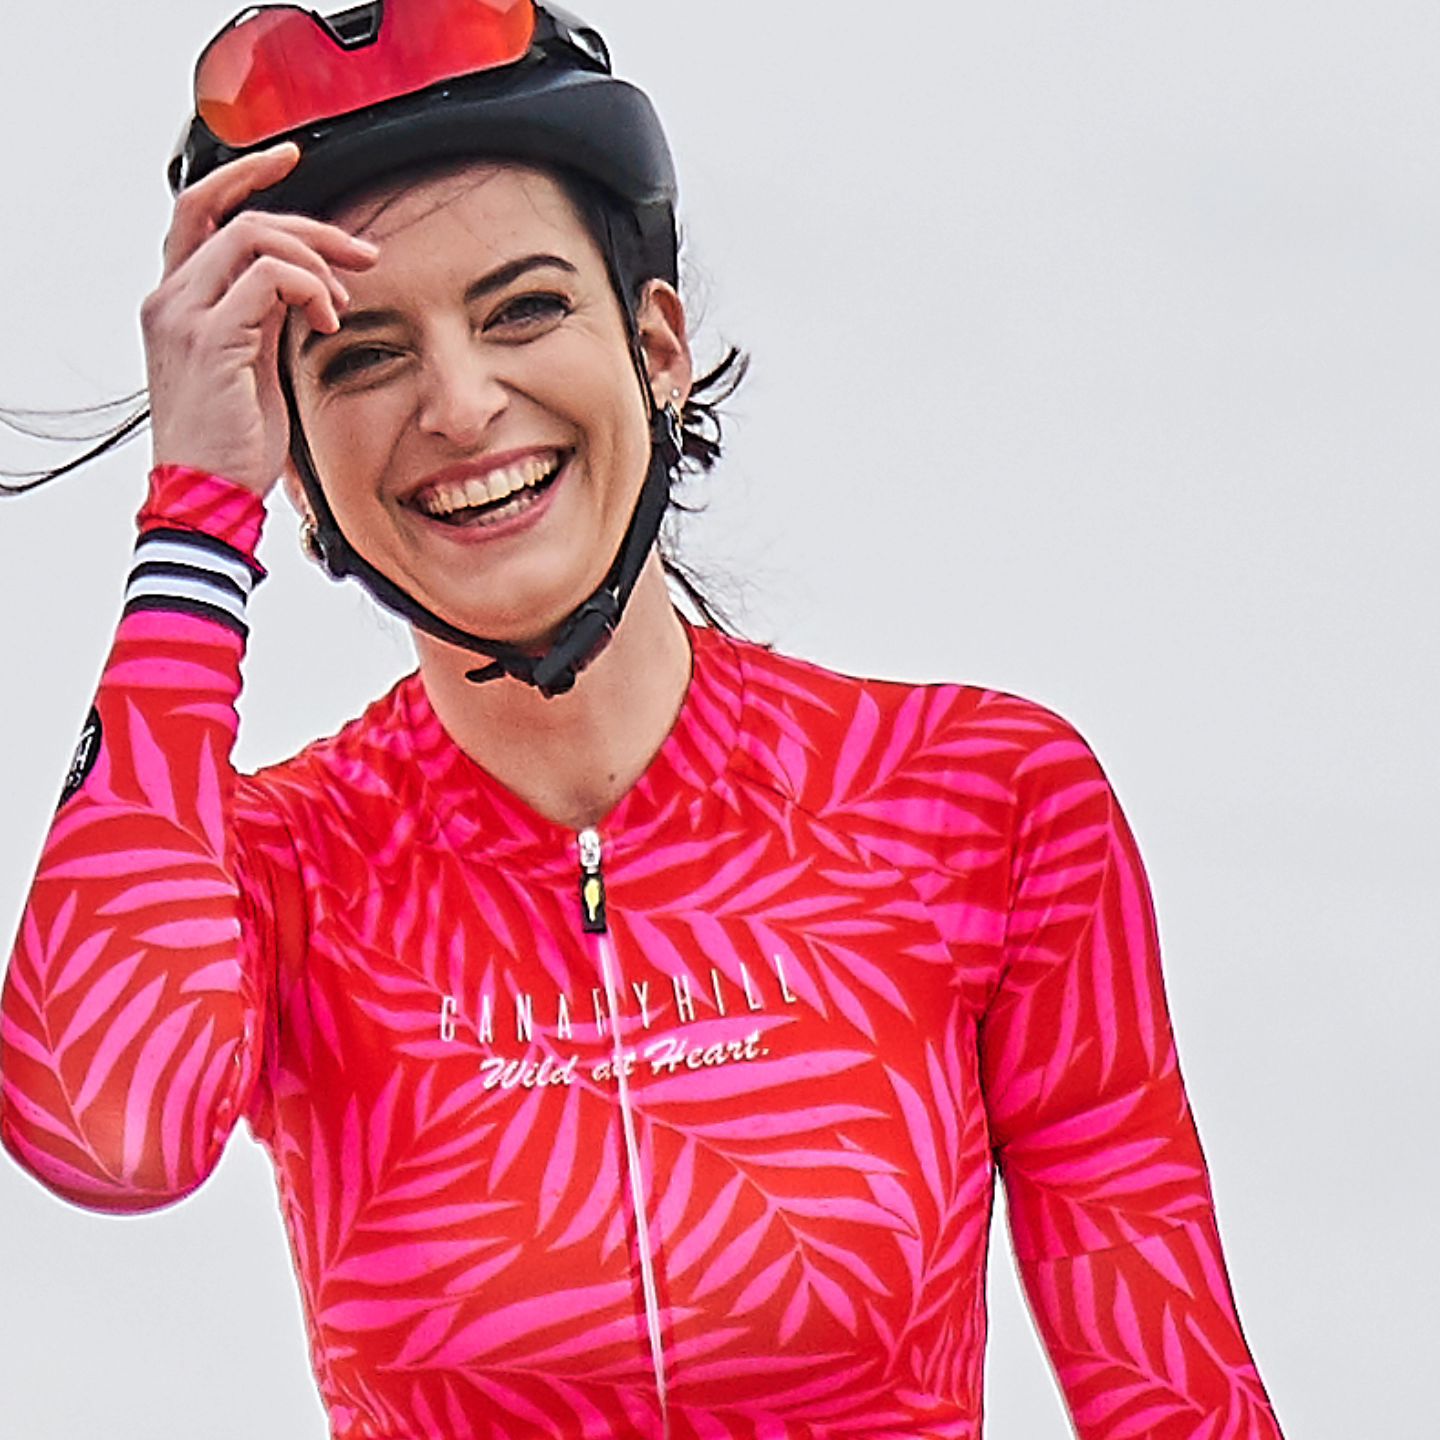 For the fierce and the brave. For the wild at heart.
Florida is our new summerproof cycling kit, in deep red with a subtile palmprint.  Female tight cut.  Soft lycra.  Mesh panels for ventilation. Matchy armwarmers included. ❤️🩷.
.
#cycling #cyclingfashion #womenscycling #instacycling #bikelife #bikelove #ridelikeagirl #cyclelikeagirl #girlsonbikes #newkitday #kitspiration #womenskit #cyclingkit #ciclismo #velolove #lecyclismeaufeminin #ikkoopbelgisch #addsomeglamour #canaryhill